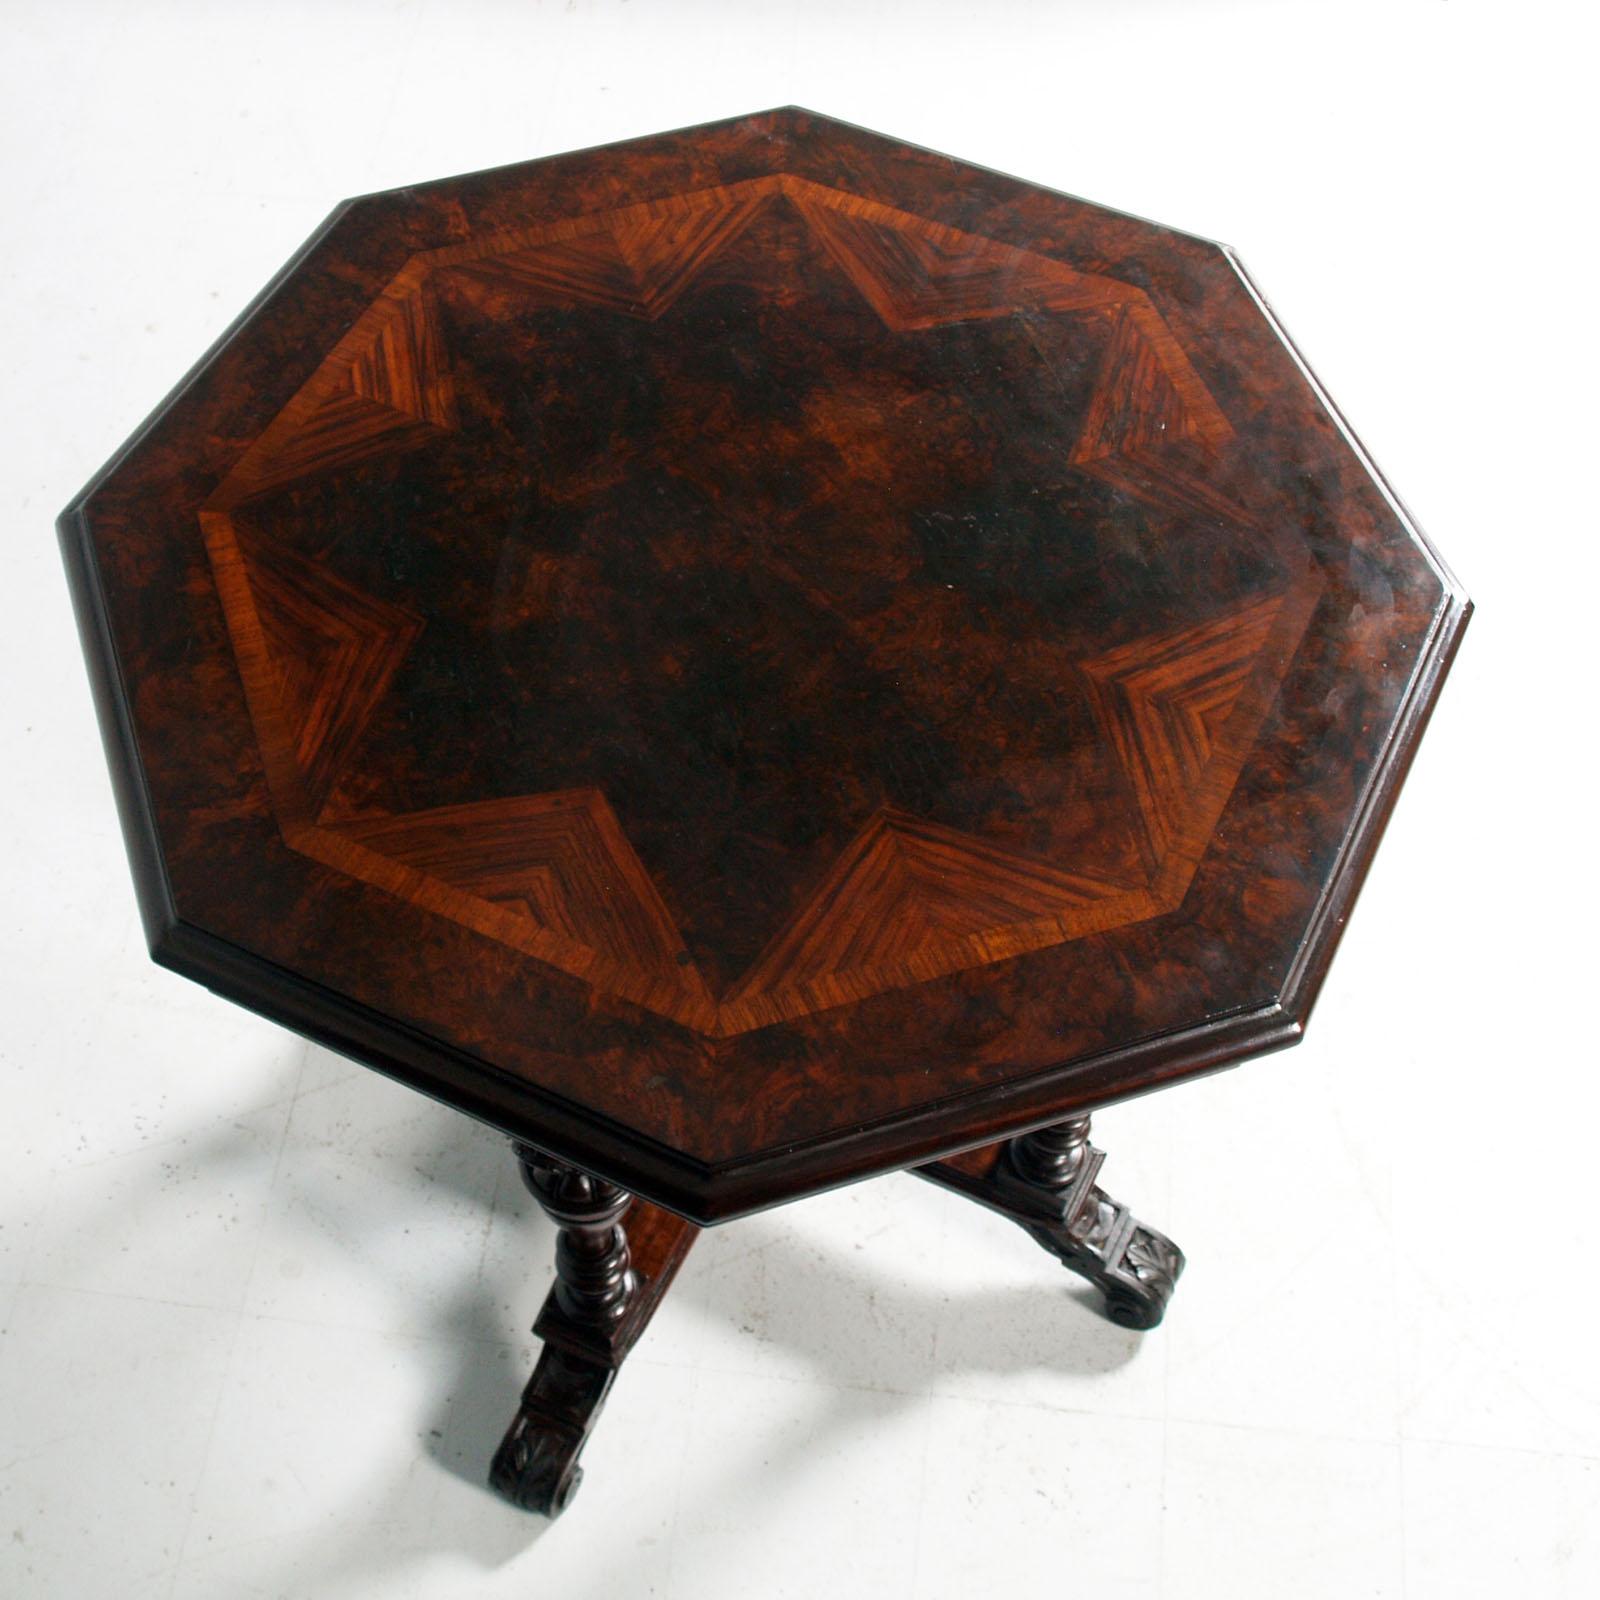 Carved 19th Century Venetian Renaissance Octagonal Table in Walnut by Testolini Freres For Sale